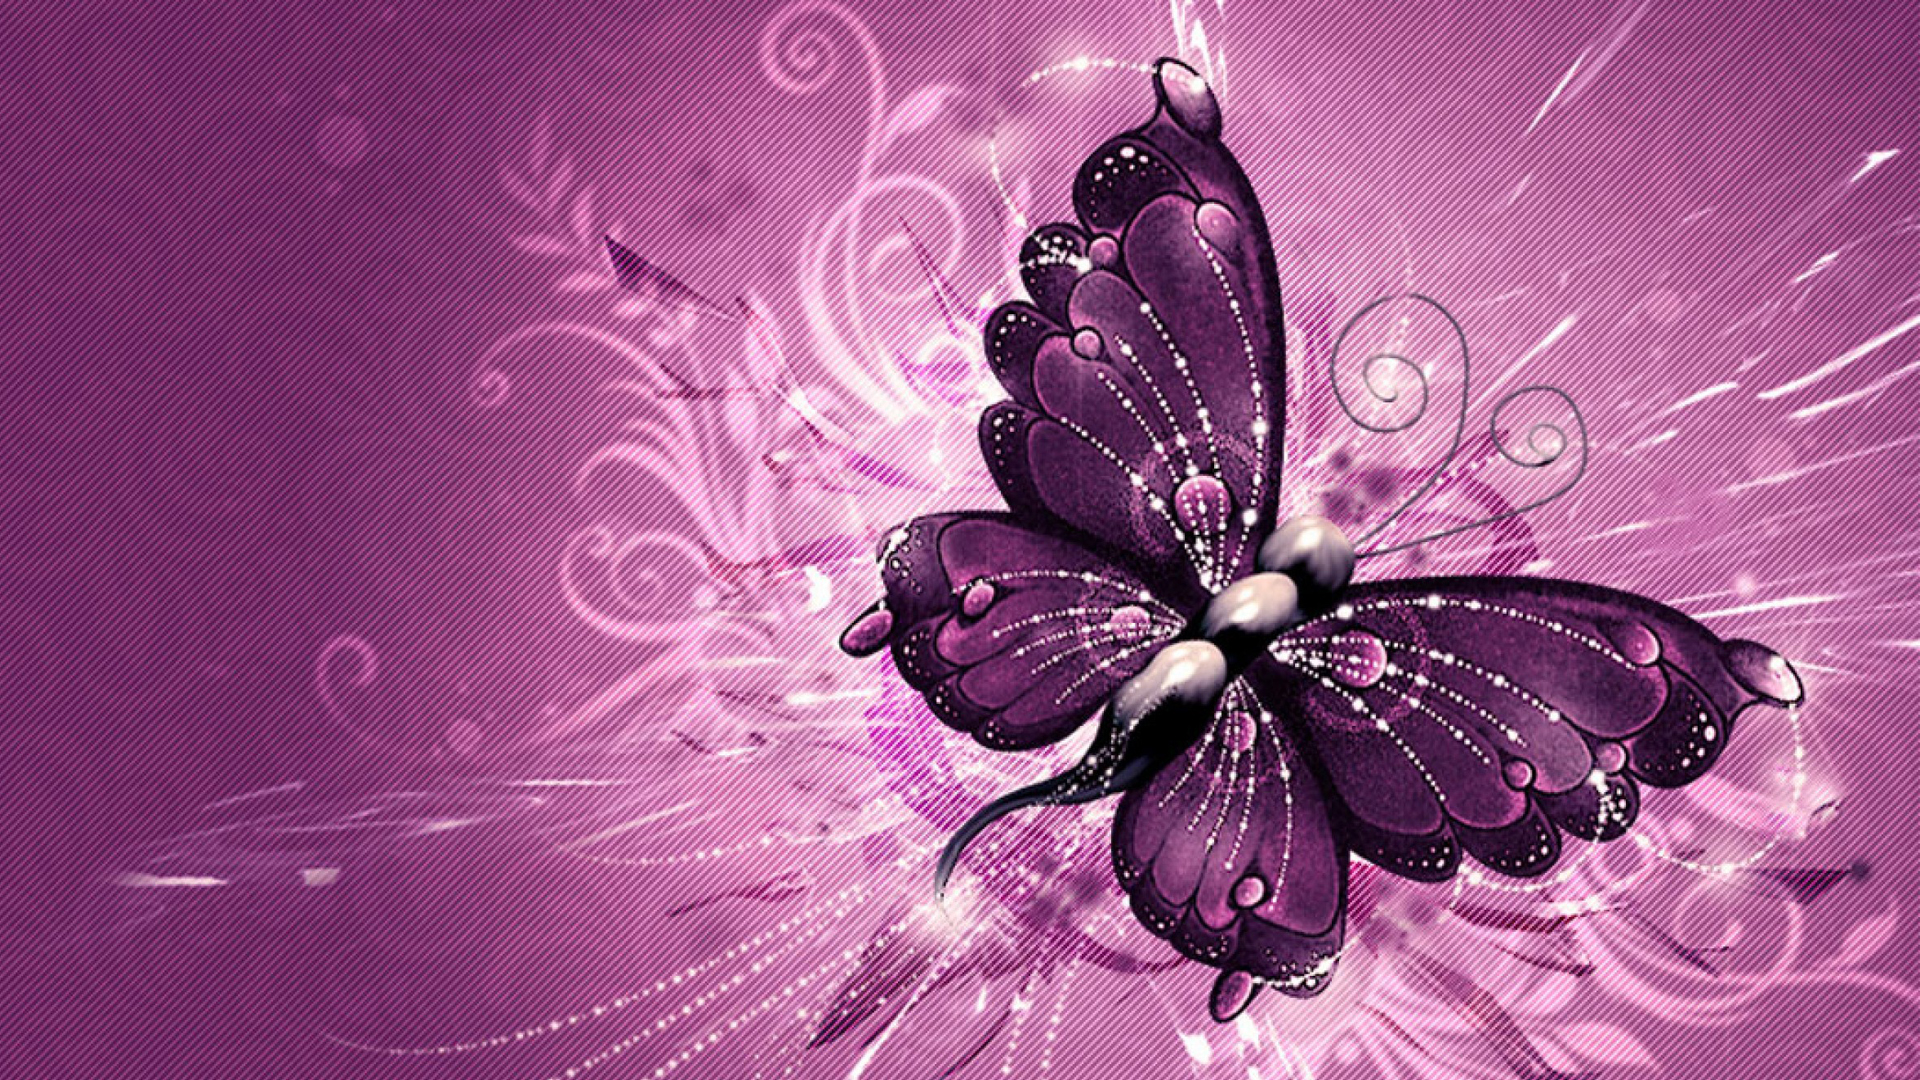 HD Wallpapers with Butterfly Photos Free Download in 3D - HD Wallpapers